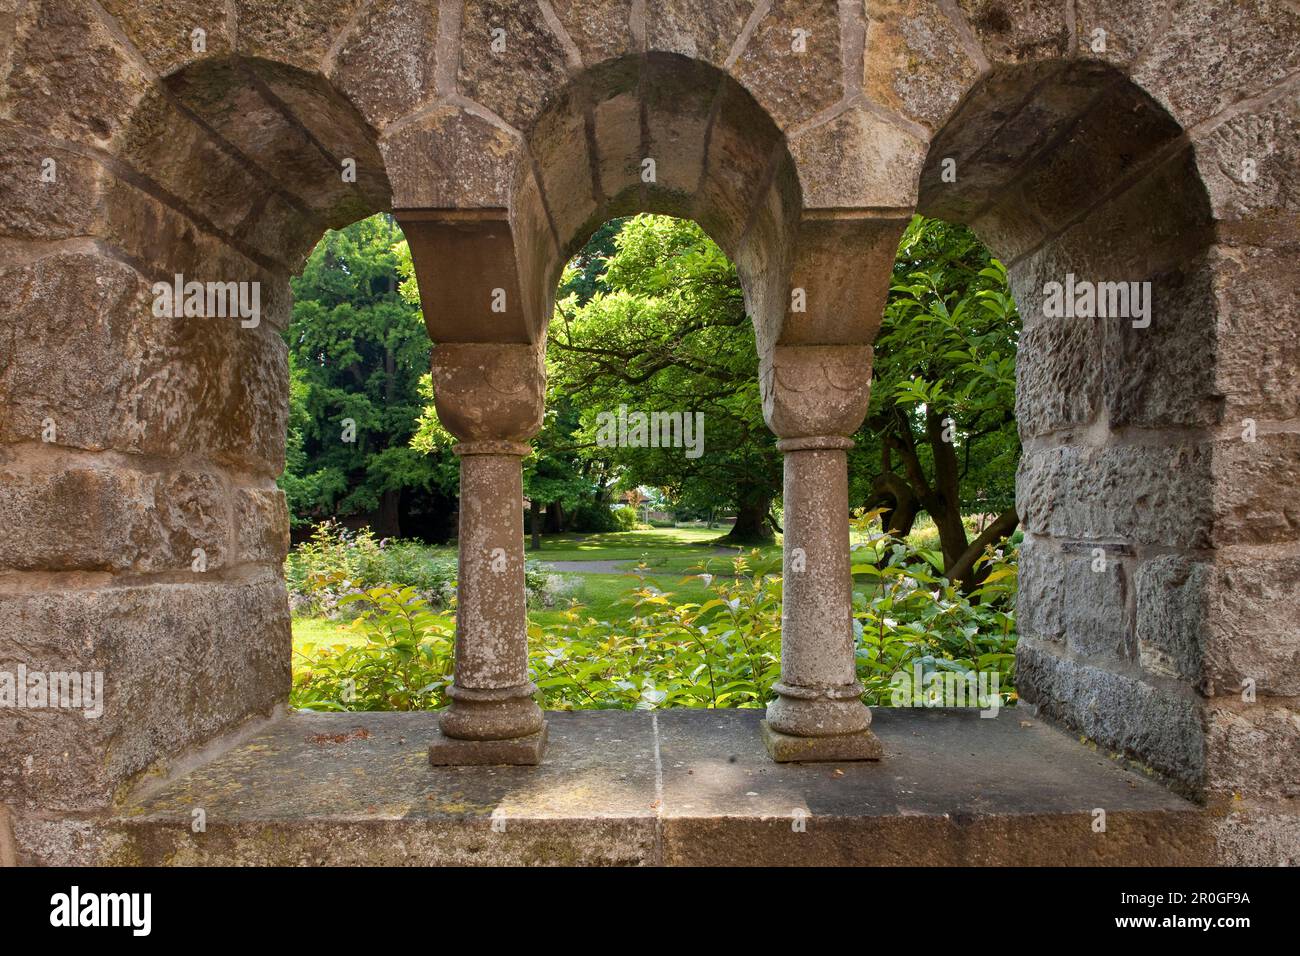 Garden of the abbess, Fischbeck Abbey, Hessisch Oldendorf, Lower Saxony, Germany Stock Photo